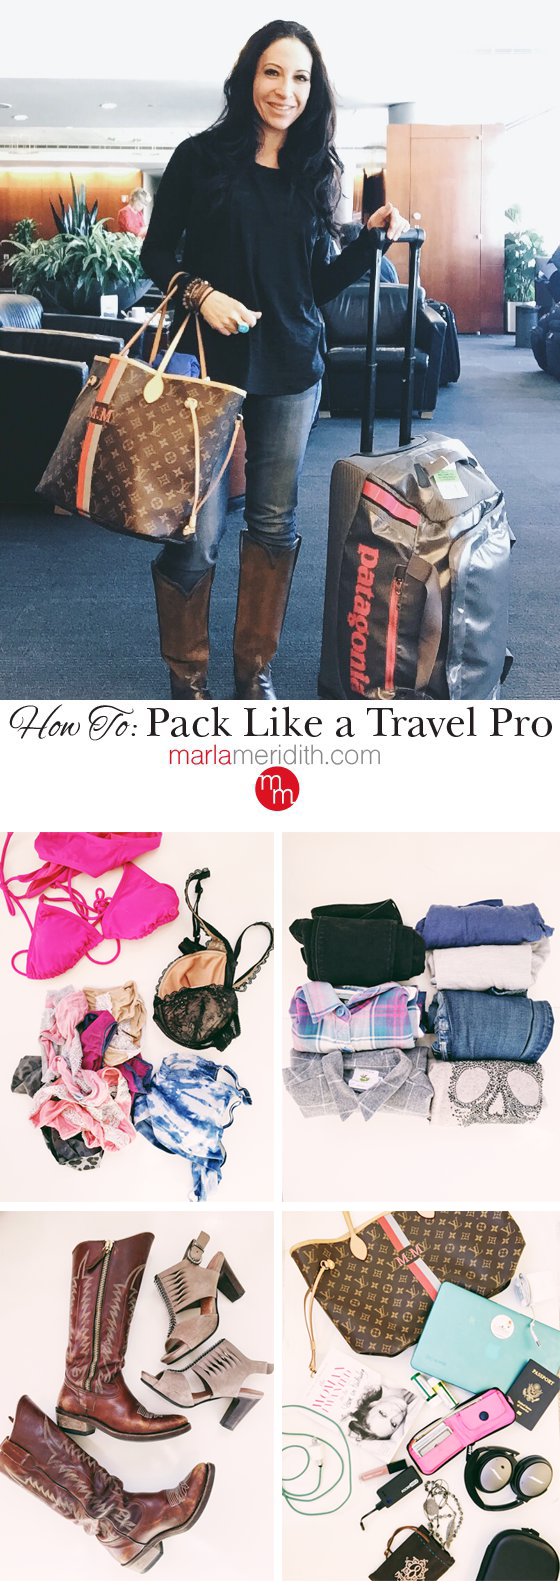 How to Pack Like a Travel Pro! I travel the world often for work & play. Here's all you need to know from an expert! MarlaMeridith.com ( @marlameridith )